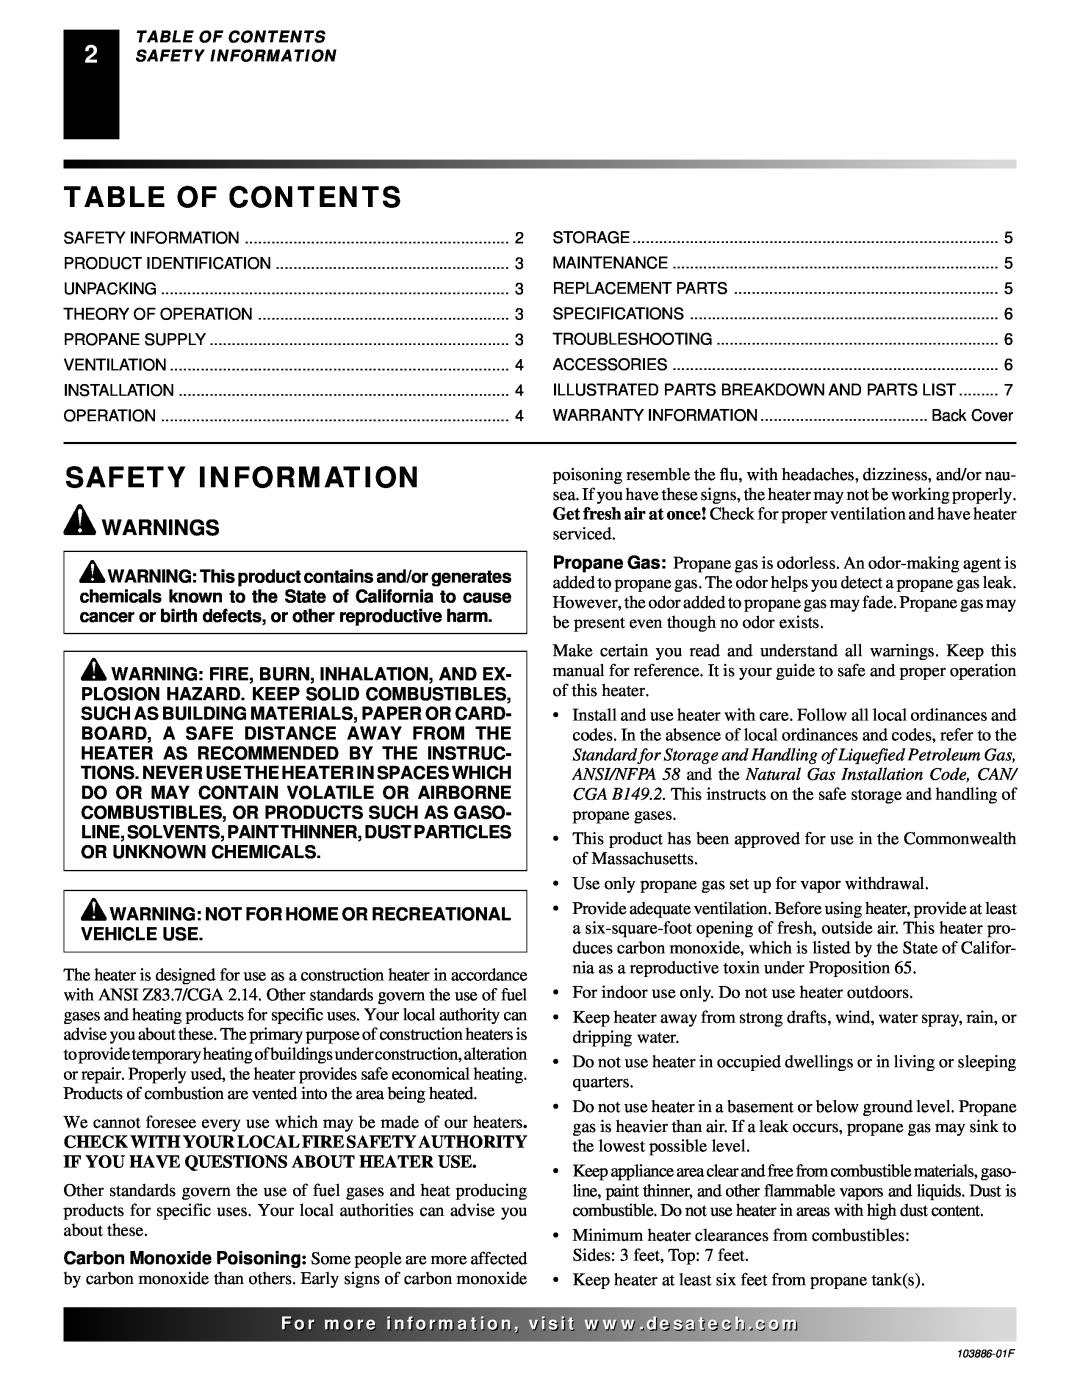 Desa TC200V, RCP200V Table Of Contents, Safety Information, Warnings, Warning Not For Home Or Recreational Vehicle Use 